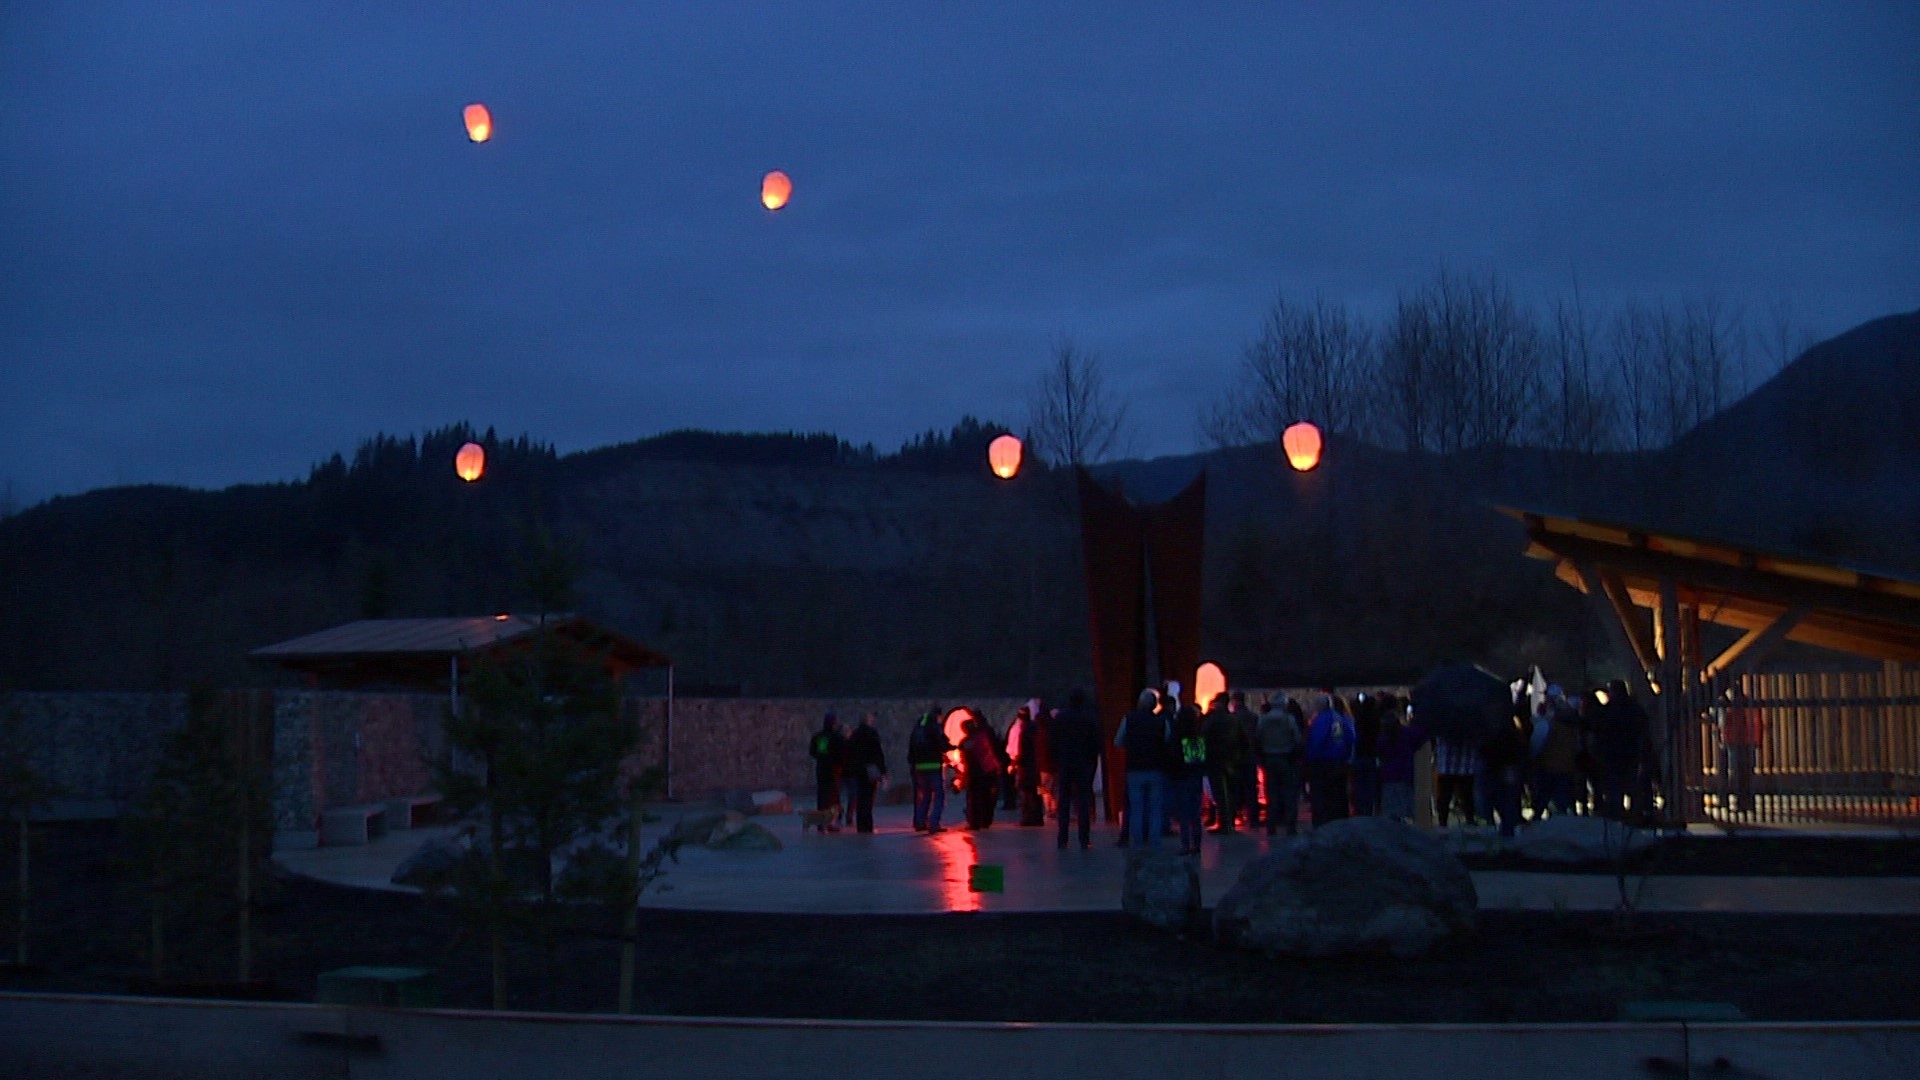 For the first time ever, family members invited KING 5 to view the annual lantern release honoring the 43 victims of the Oso landslide.